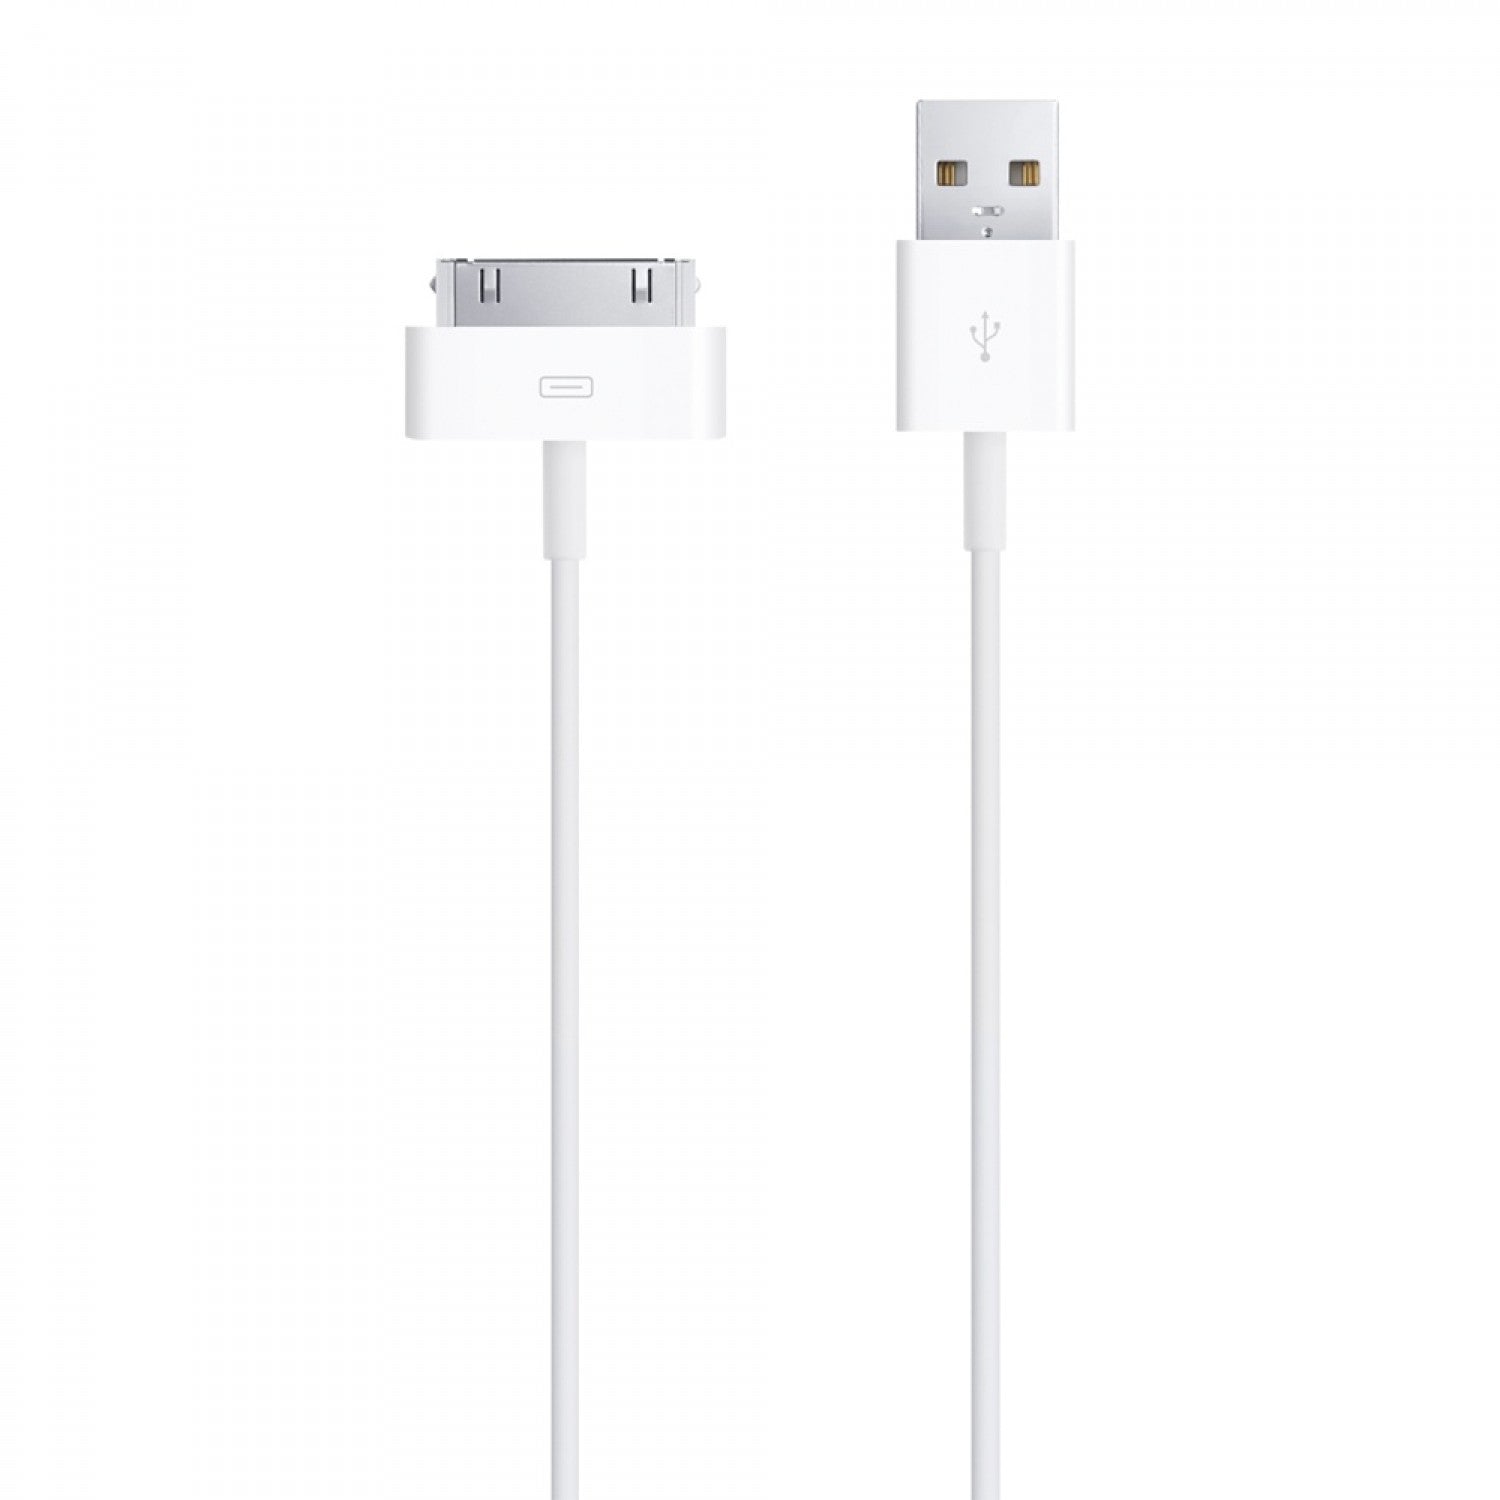 30-pin USB Charging & Data Cable for iPhone / iPad - 1 Meter